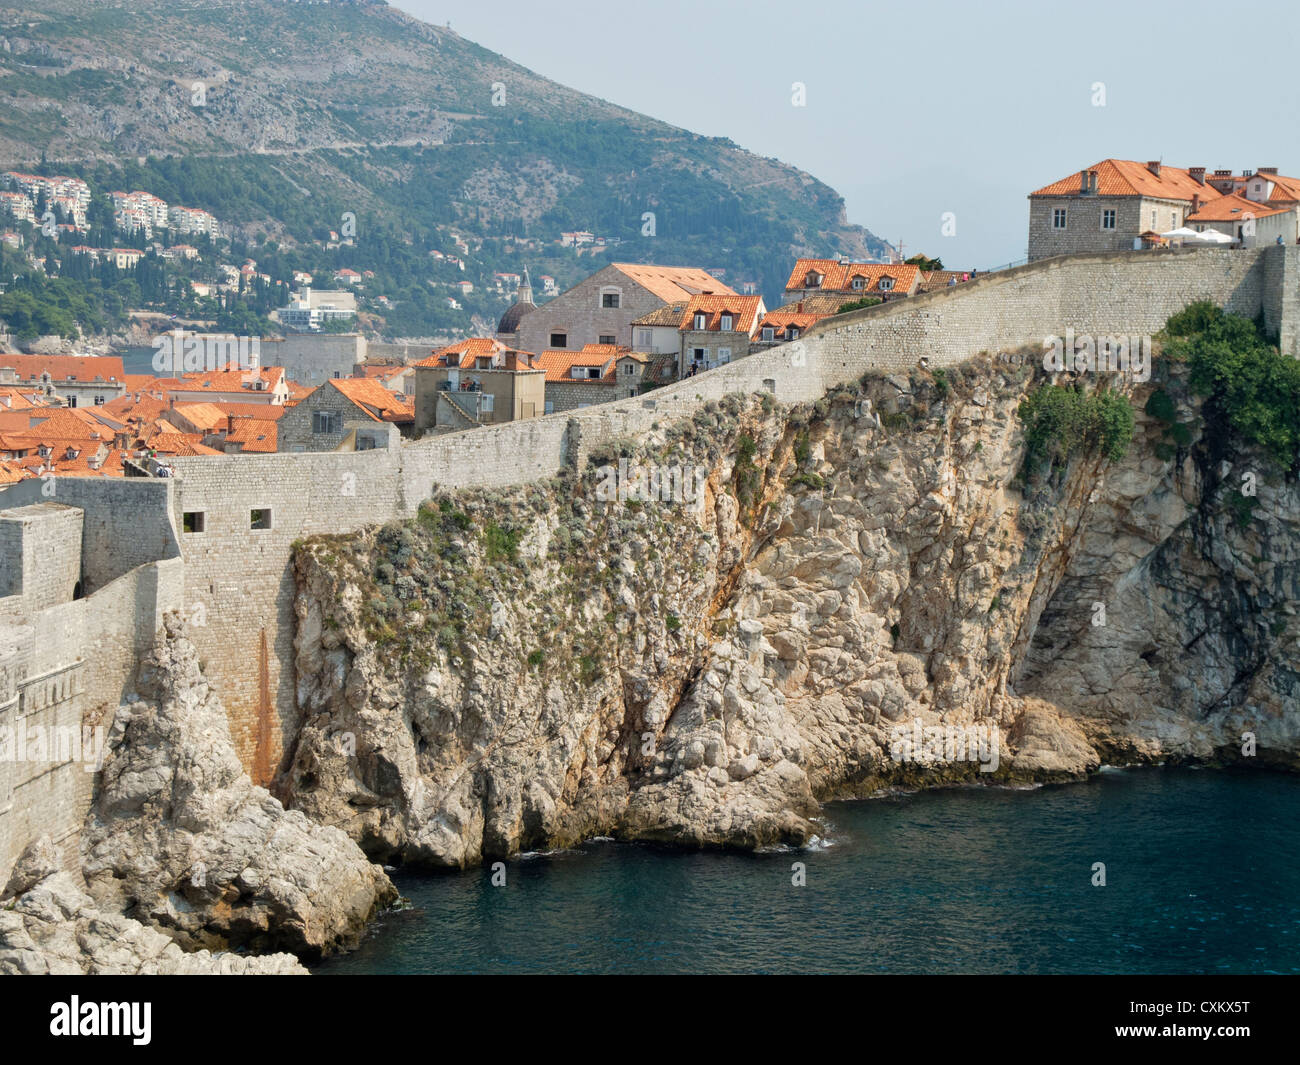 View on the city wall of old town Dubrovnik, Croatia shot from Dubrovnik castle Stock Photo